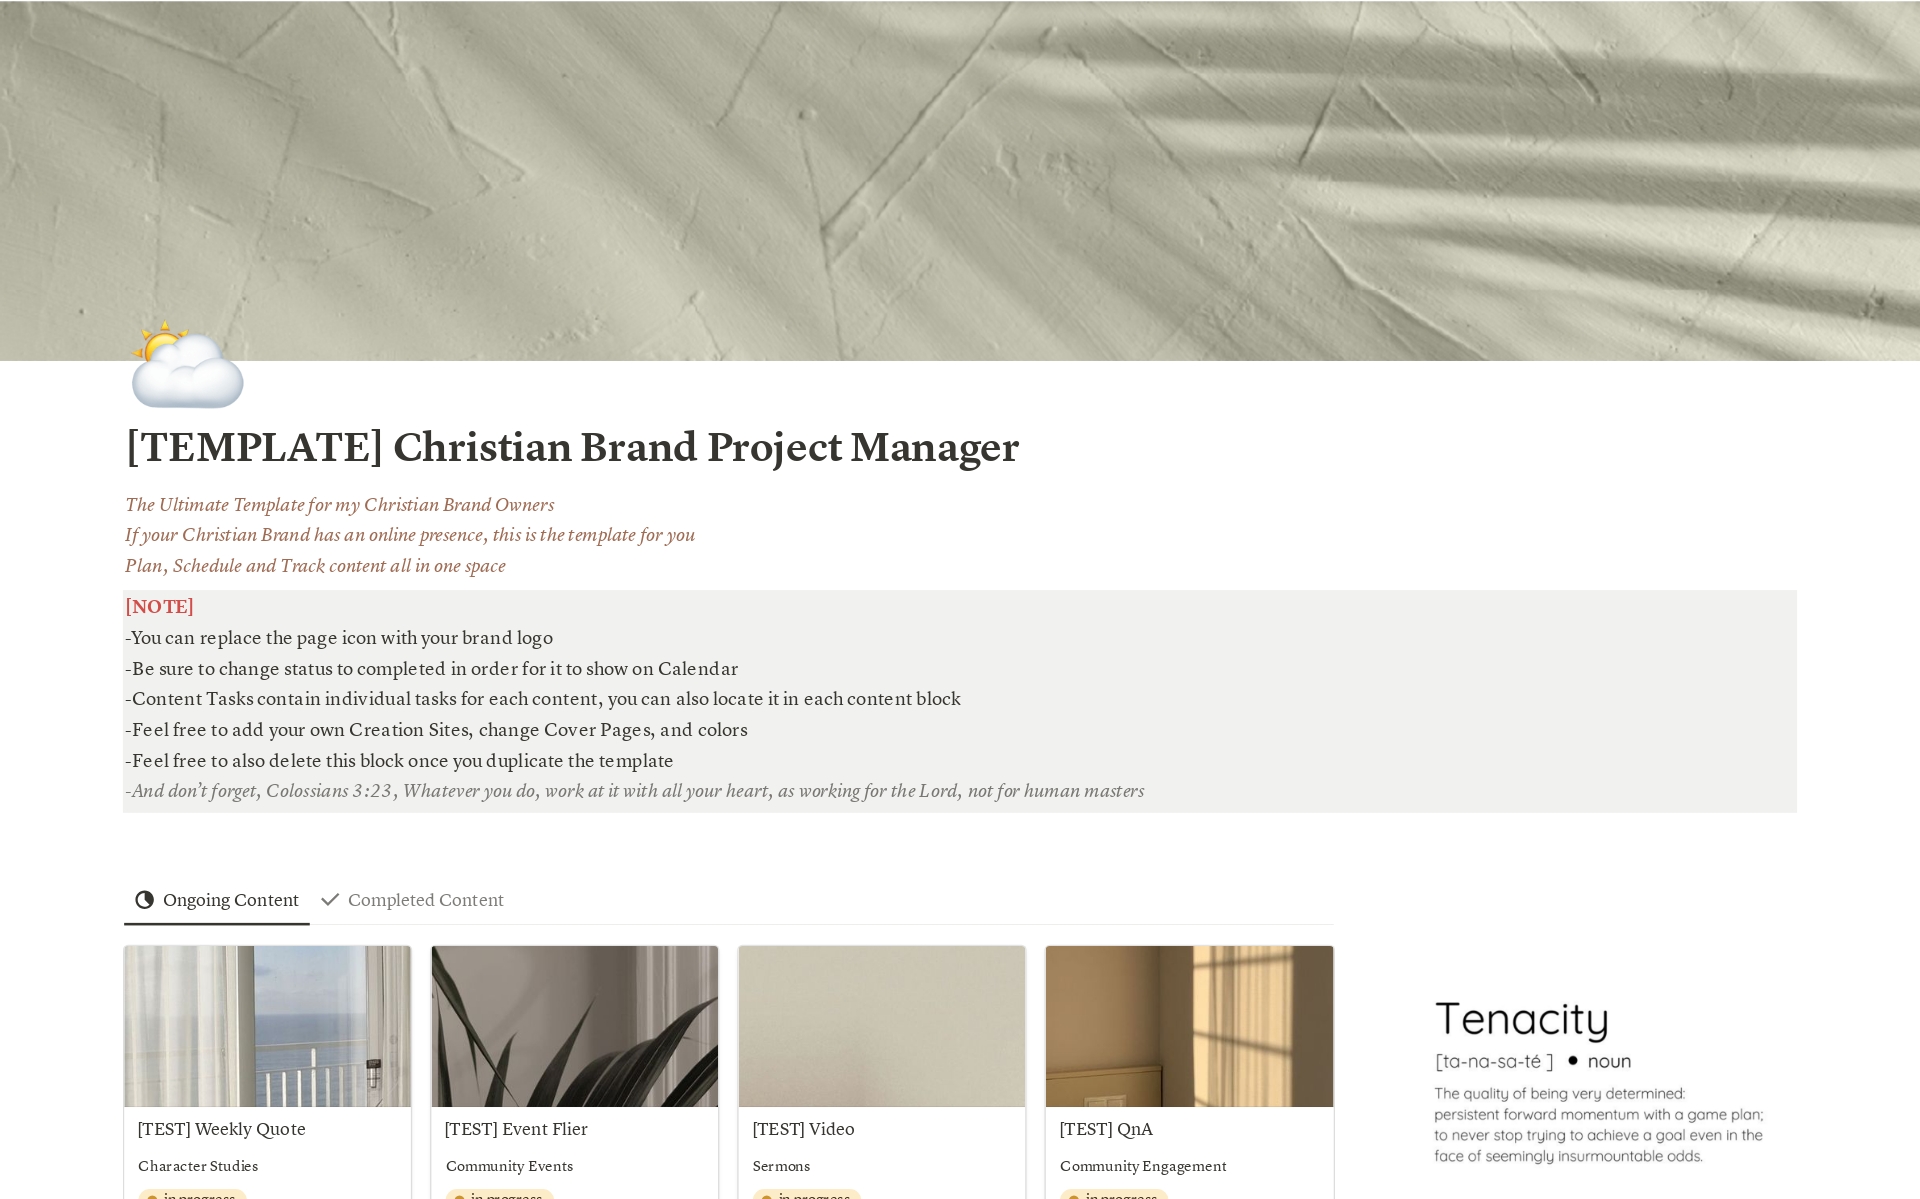 The Ultimate Template for my Christian Brand Owners
If your Christian Brand has an online presence, this is the template for you
Plan, Schedule and Track content all in one space